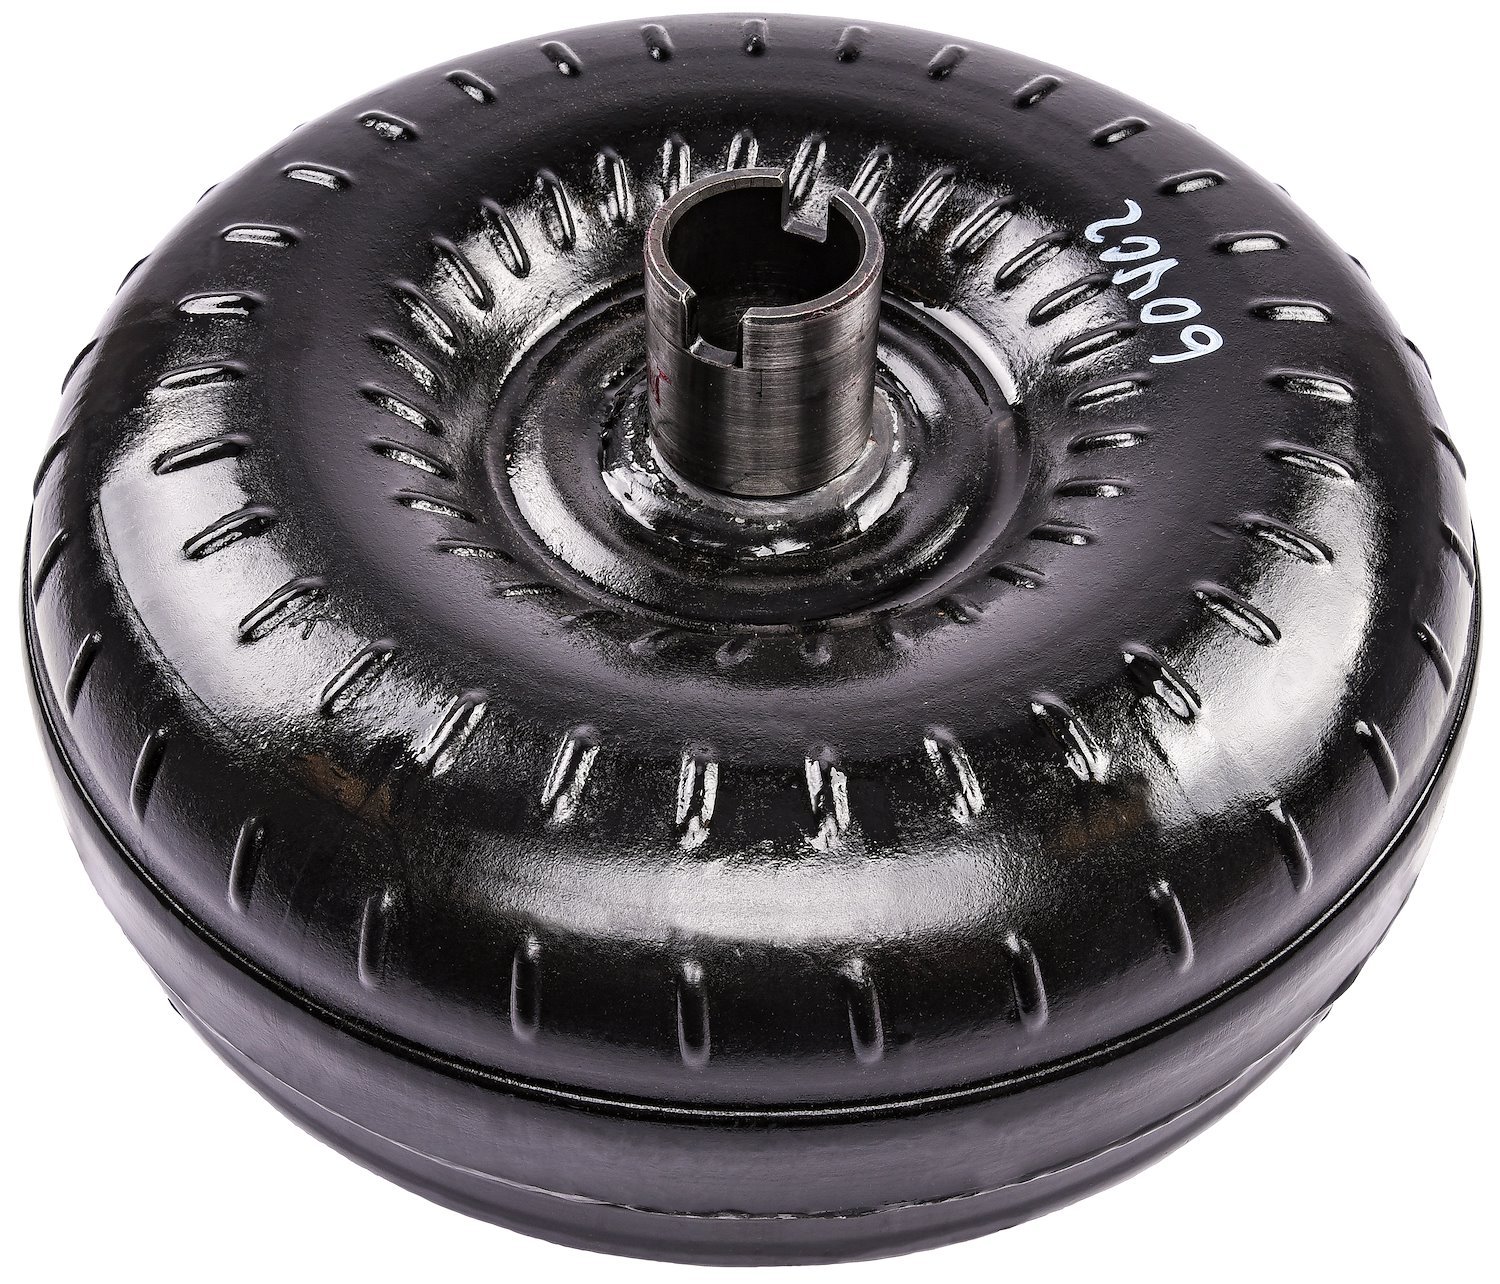 Torque Converter for GM TH350/TH400 [2000-2300 RPM Stall Speed]